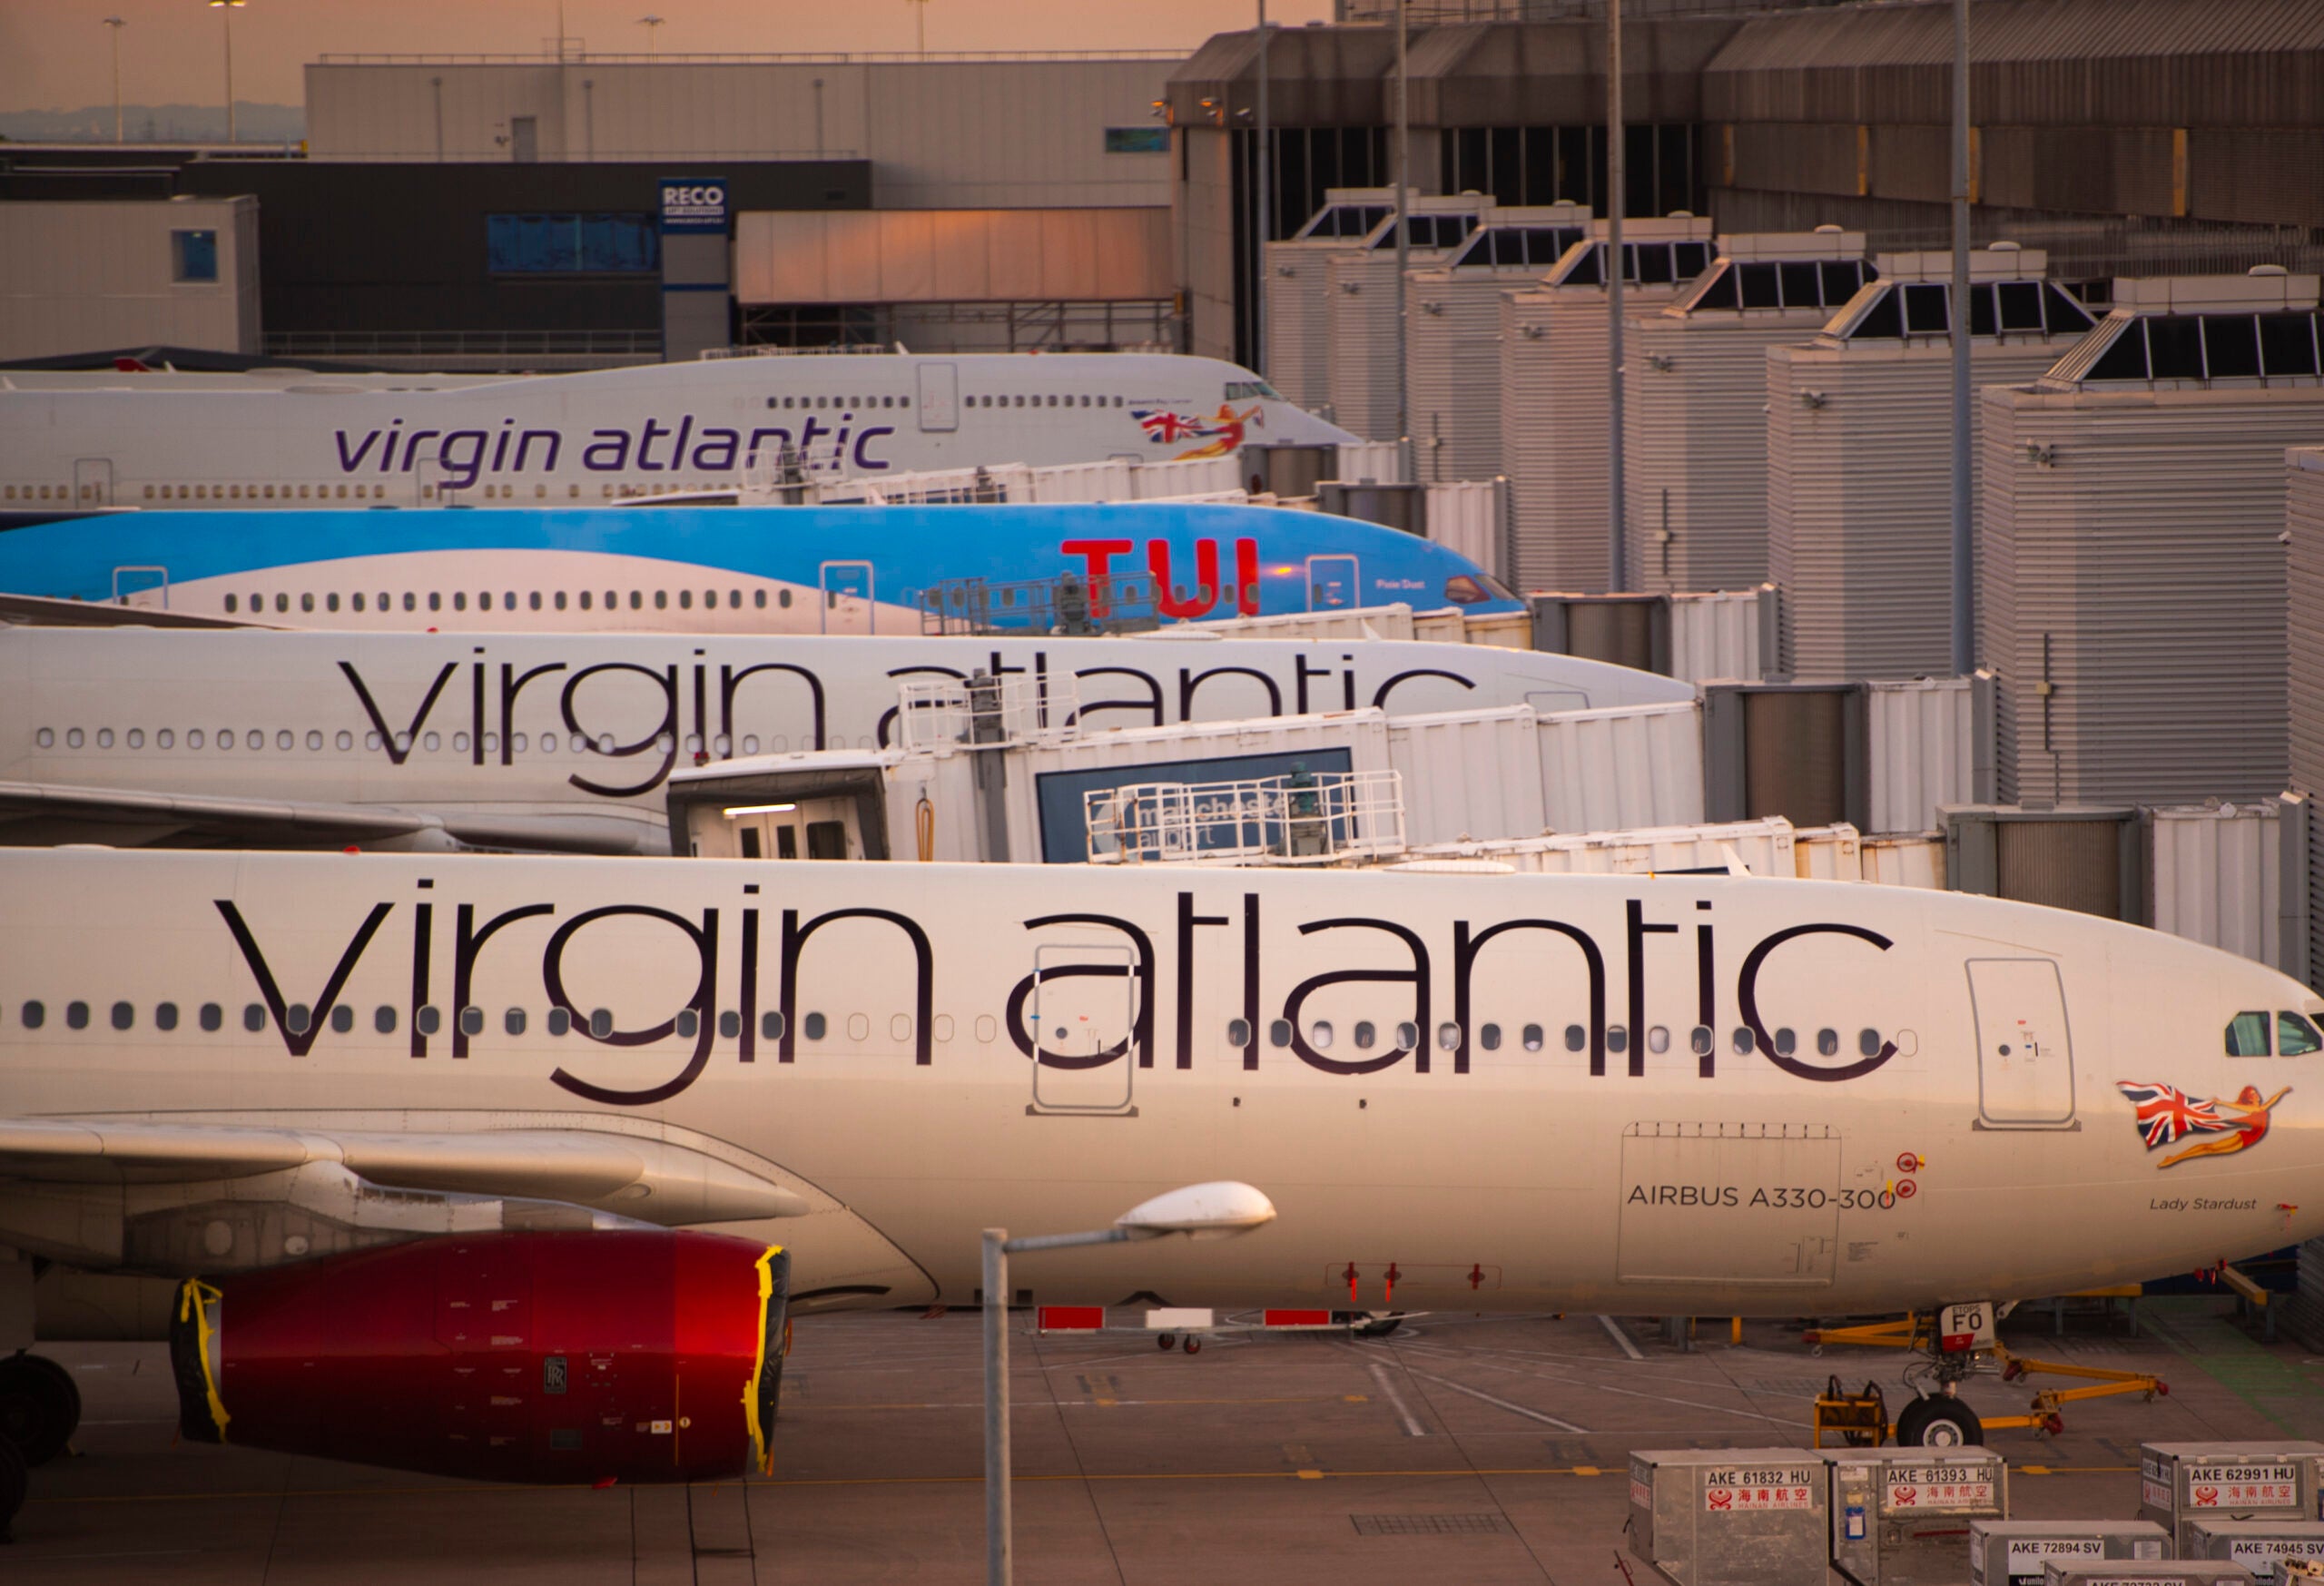 Virgin Atlantic planes parked at the gate in Manchester airport